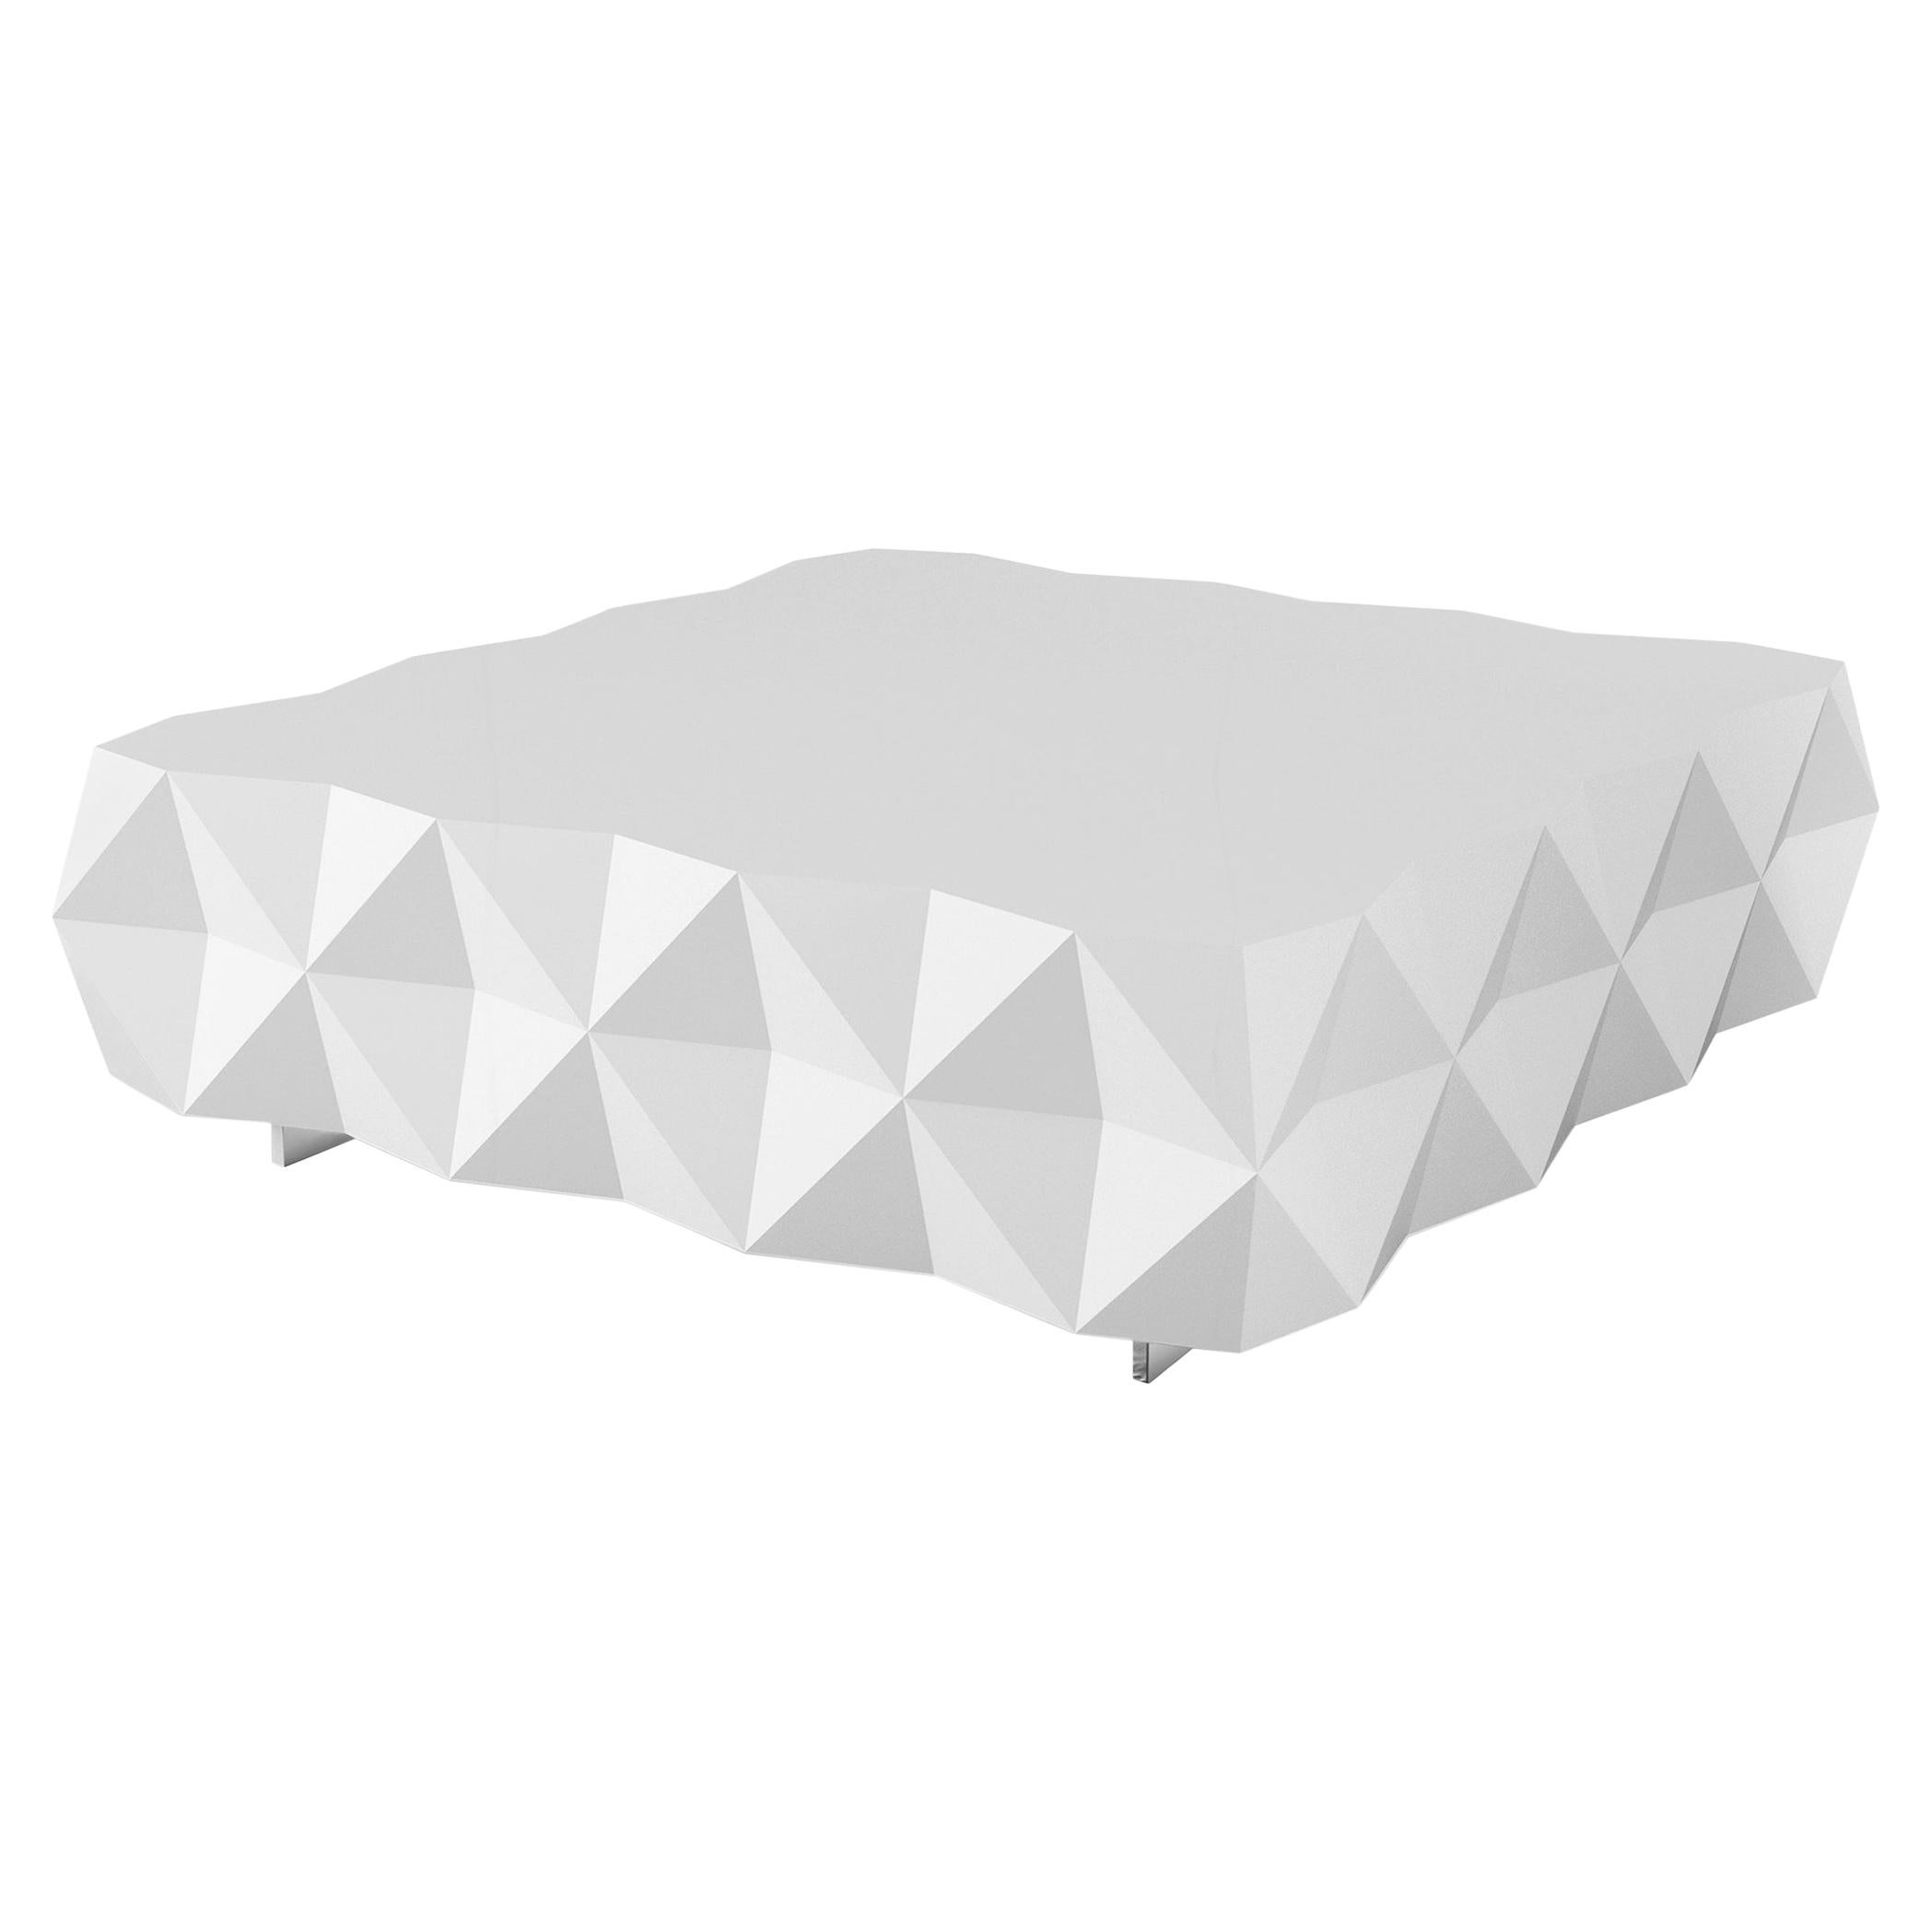 Rocky Coffee Table, Geometric Coffee Table in White by Joel Escalona For Sale